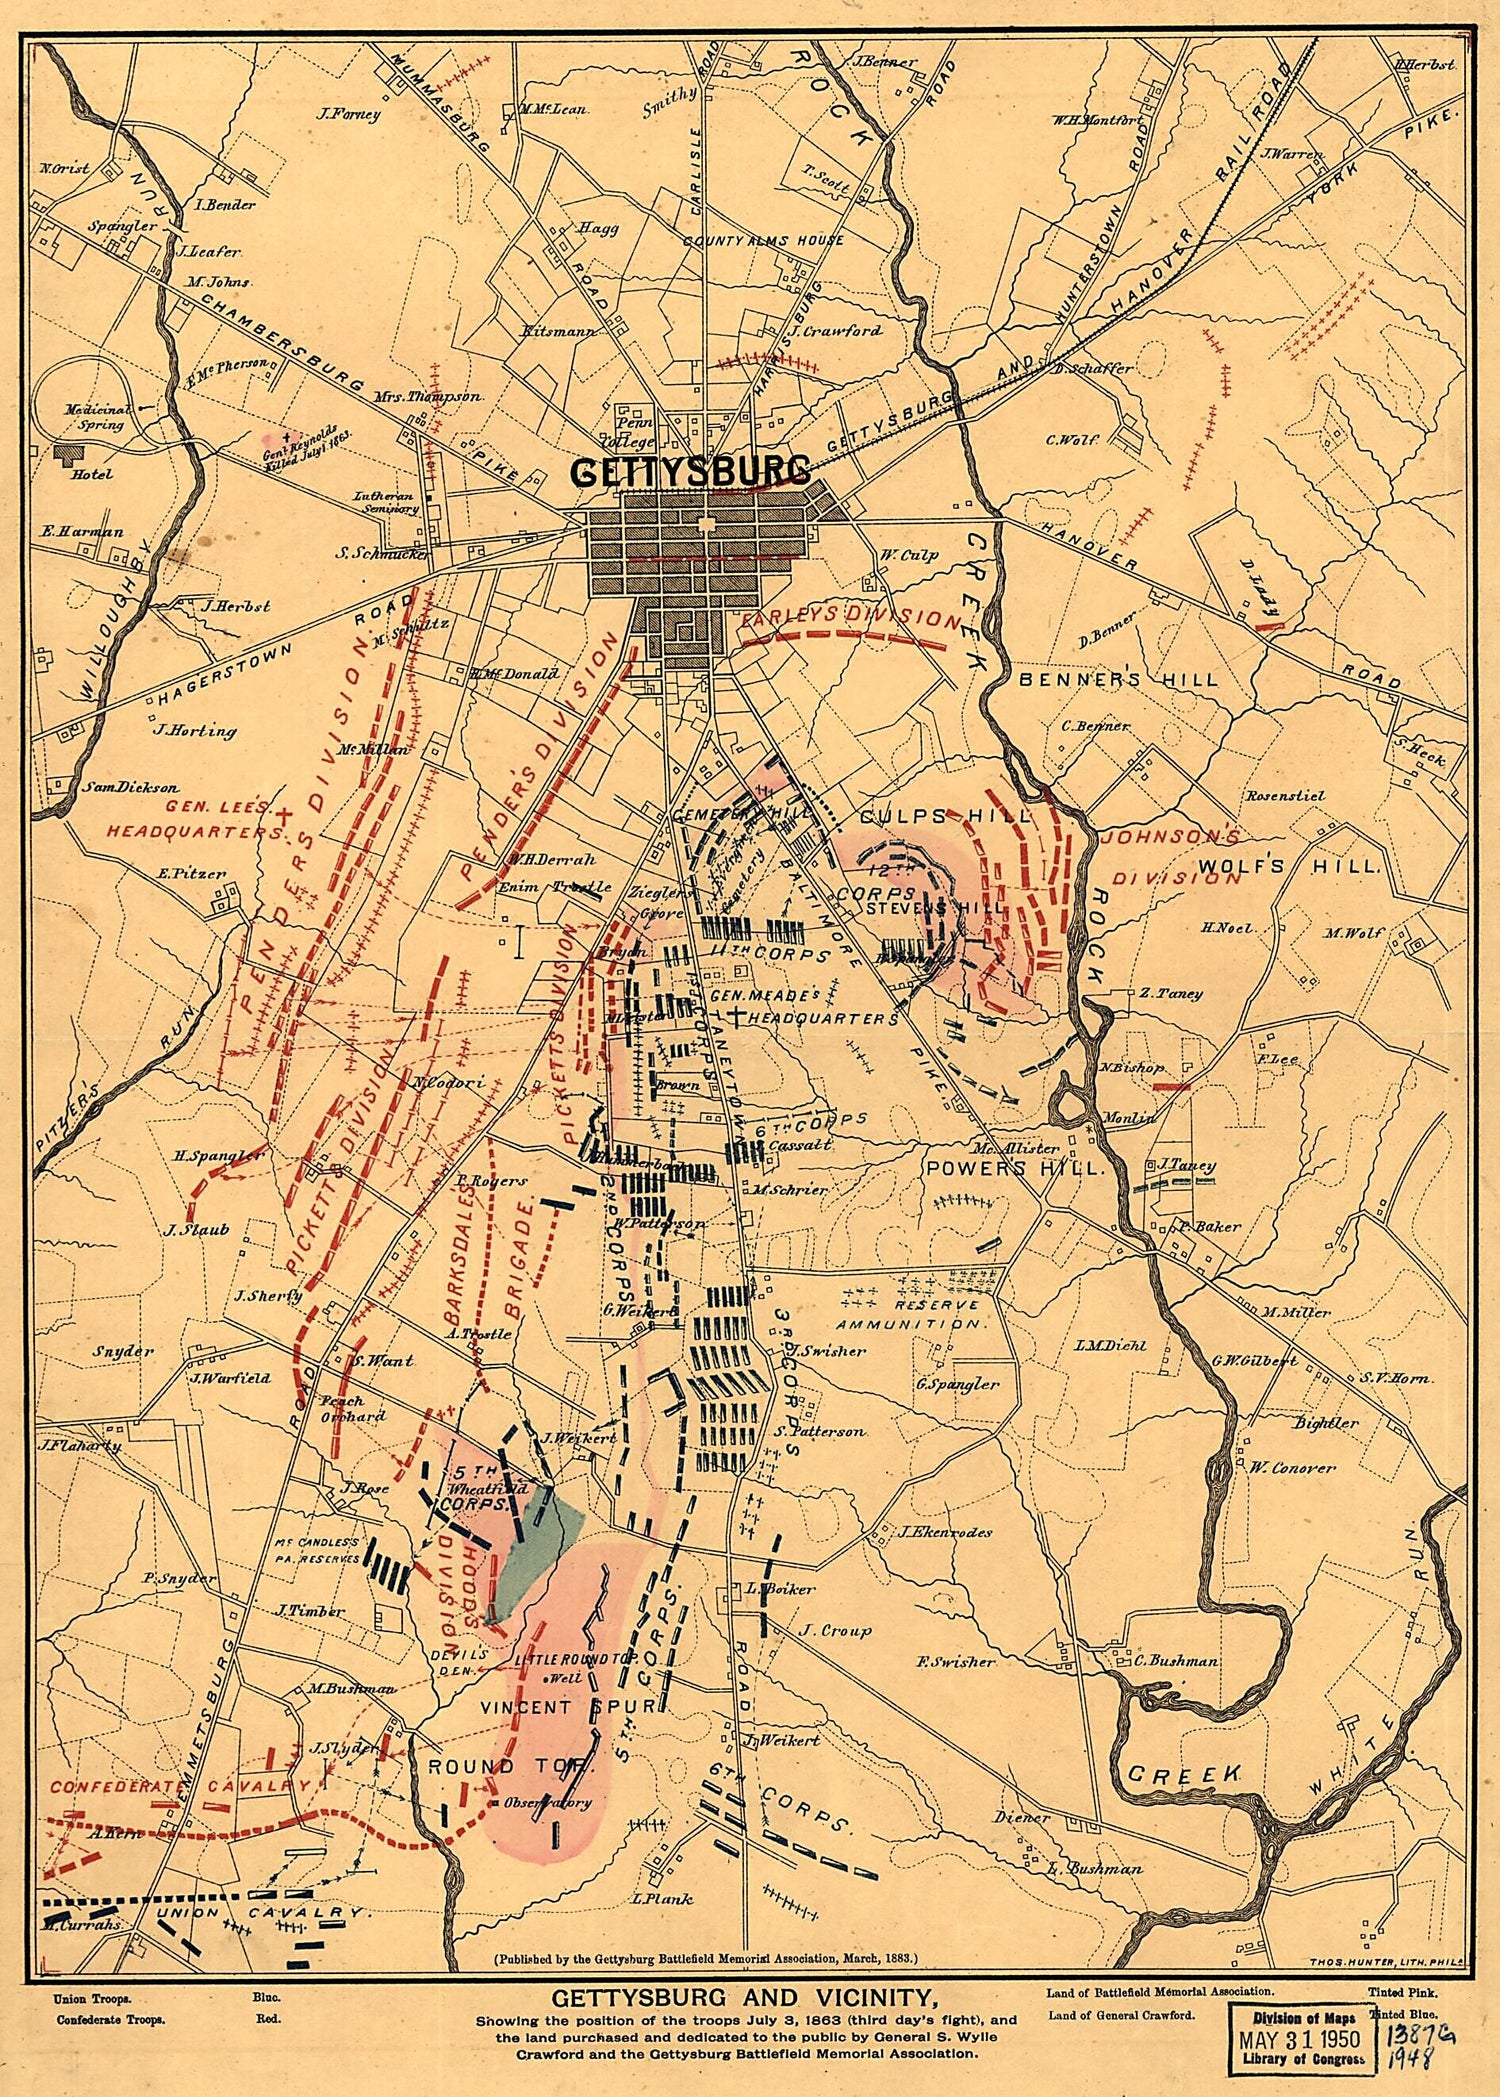 This old map of Gettysburg and Vicinity, Showing the Position of the Troops July 3, from 1863 (third Day&